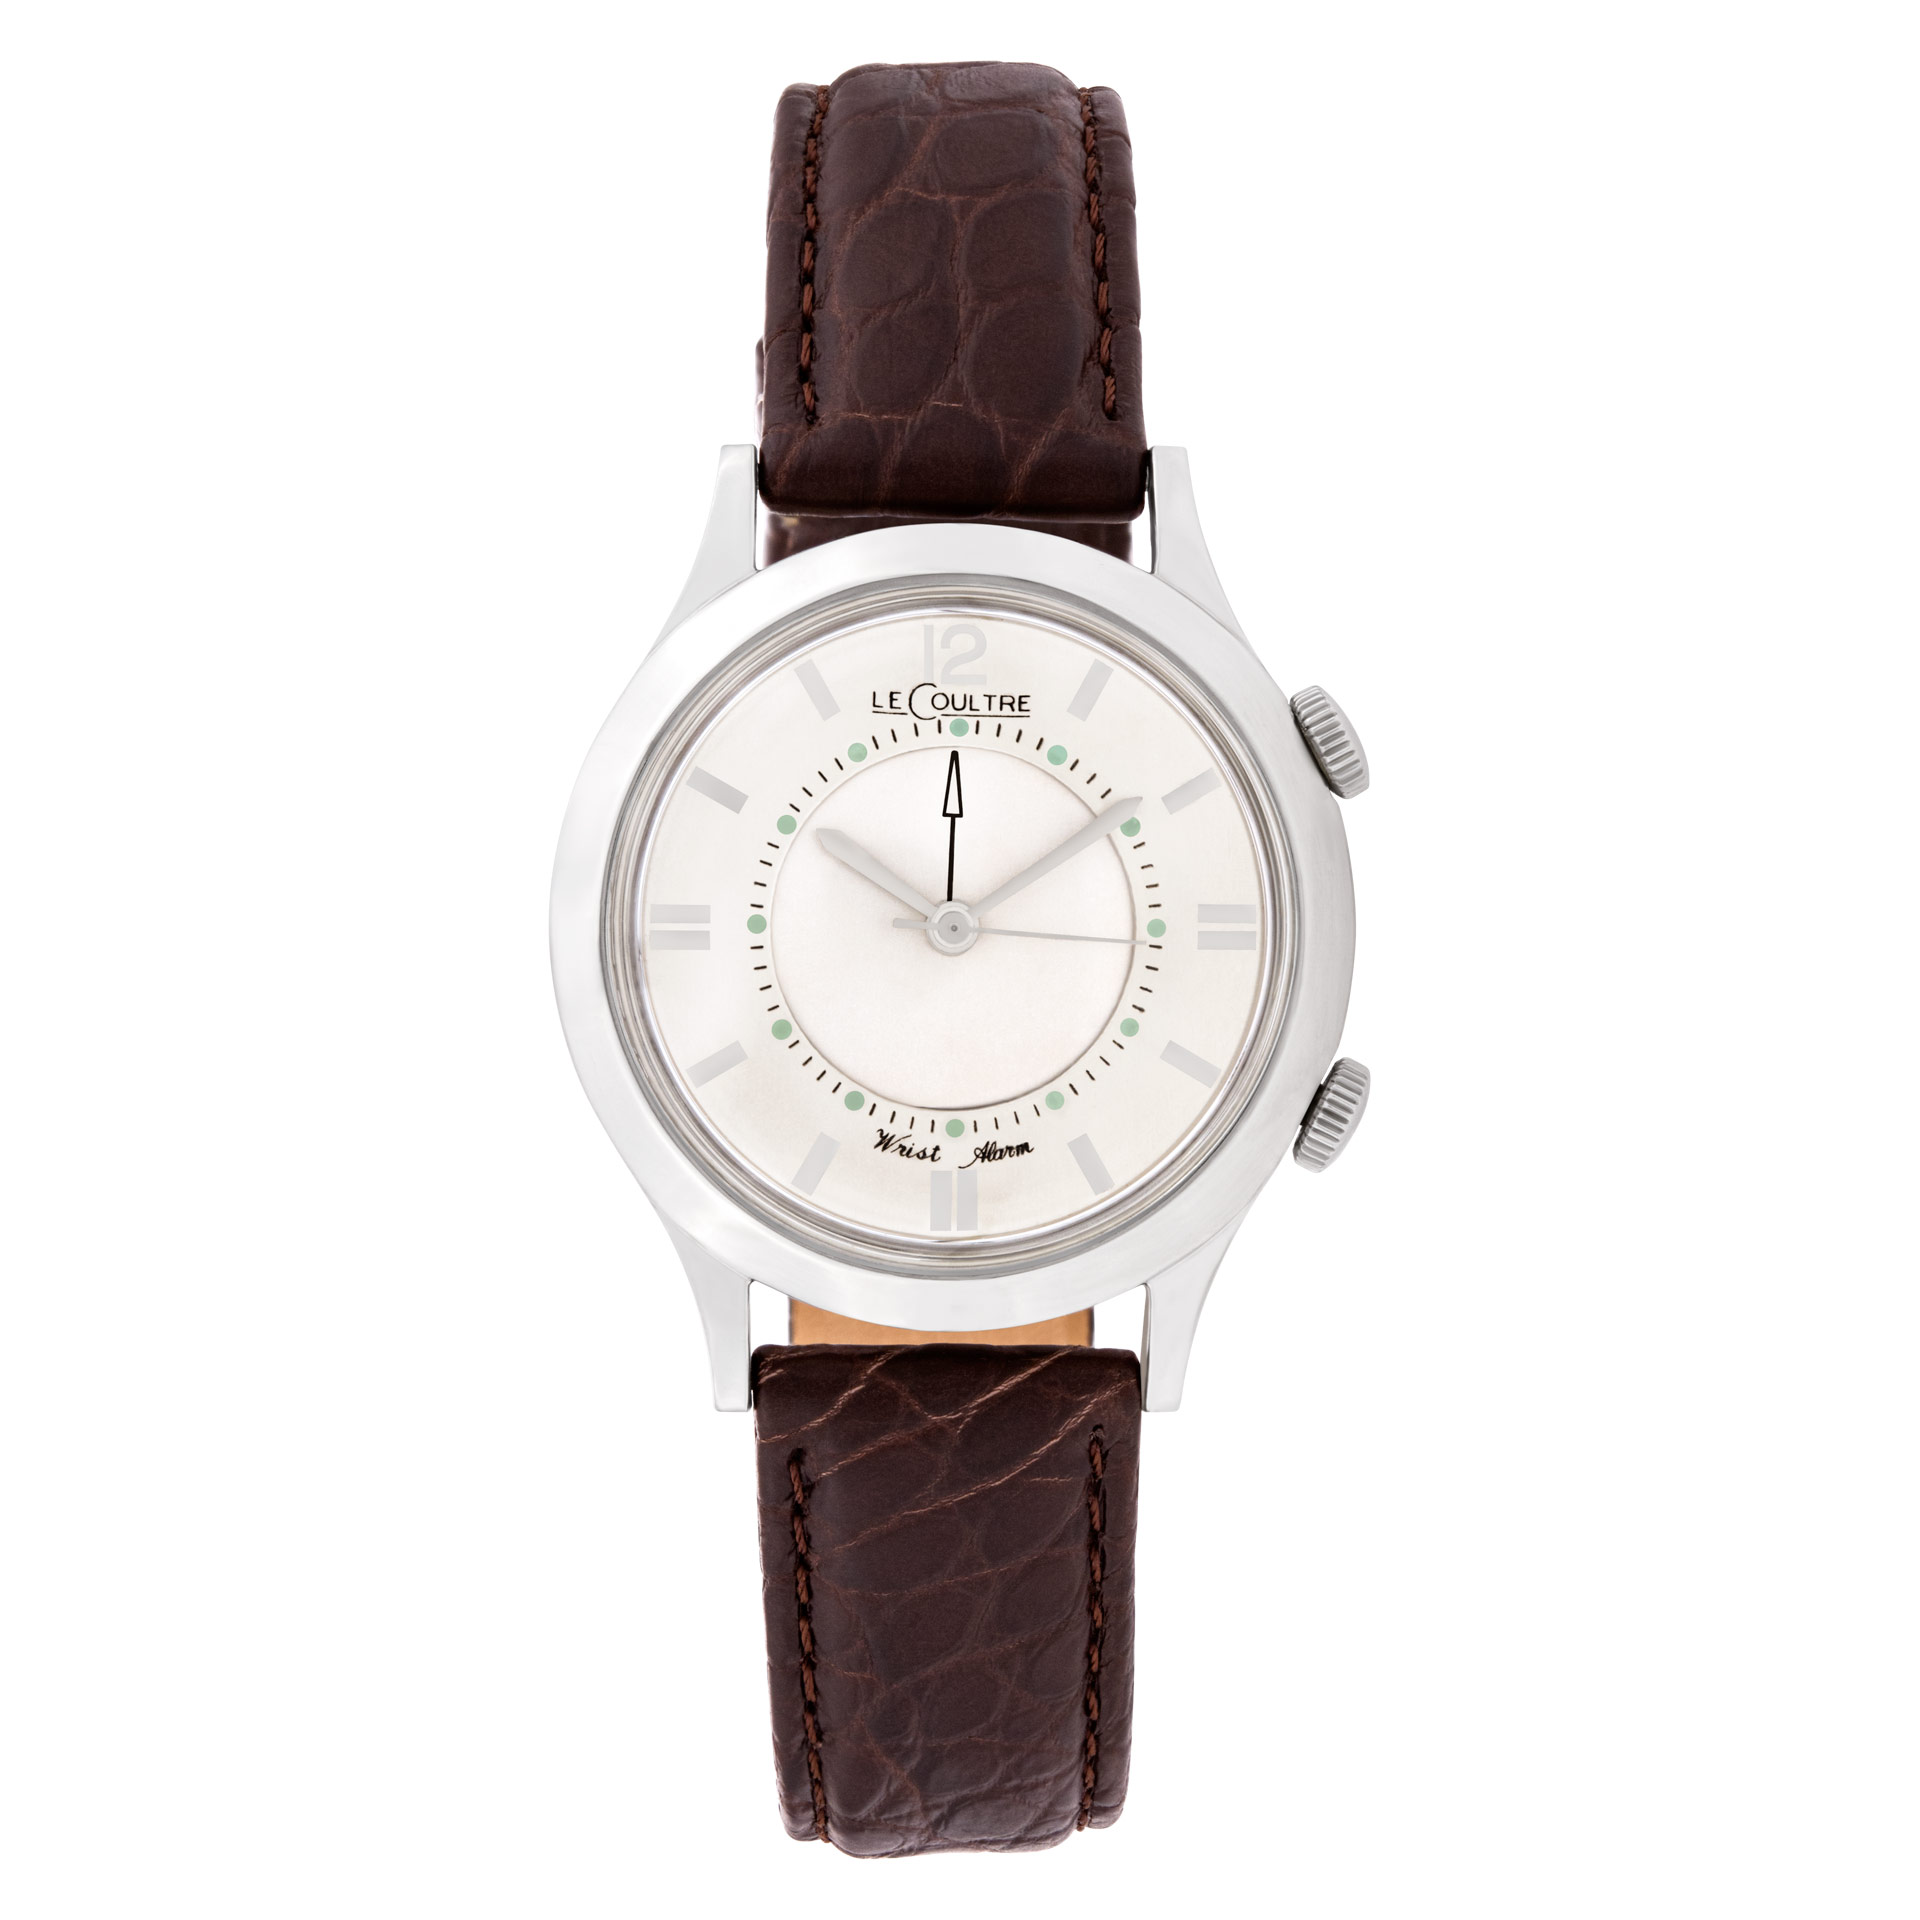 LeCoultre Classic 33mm image 1